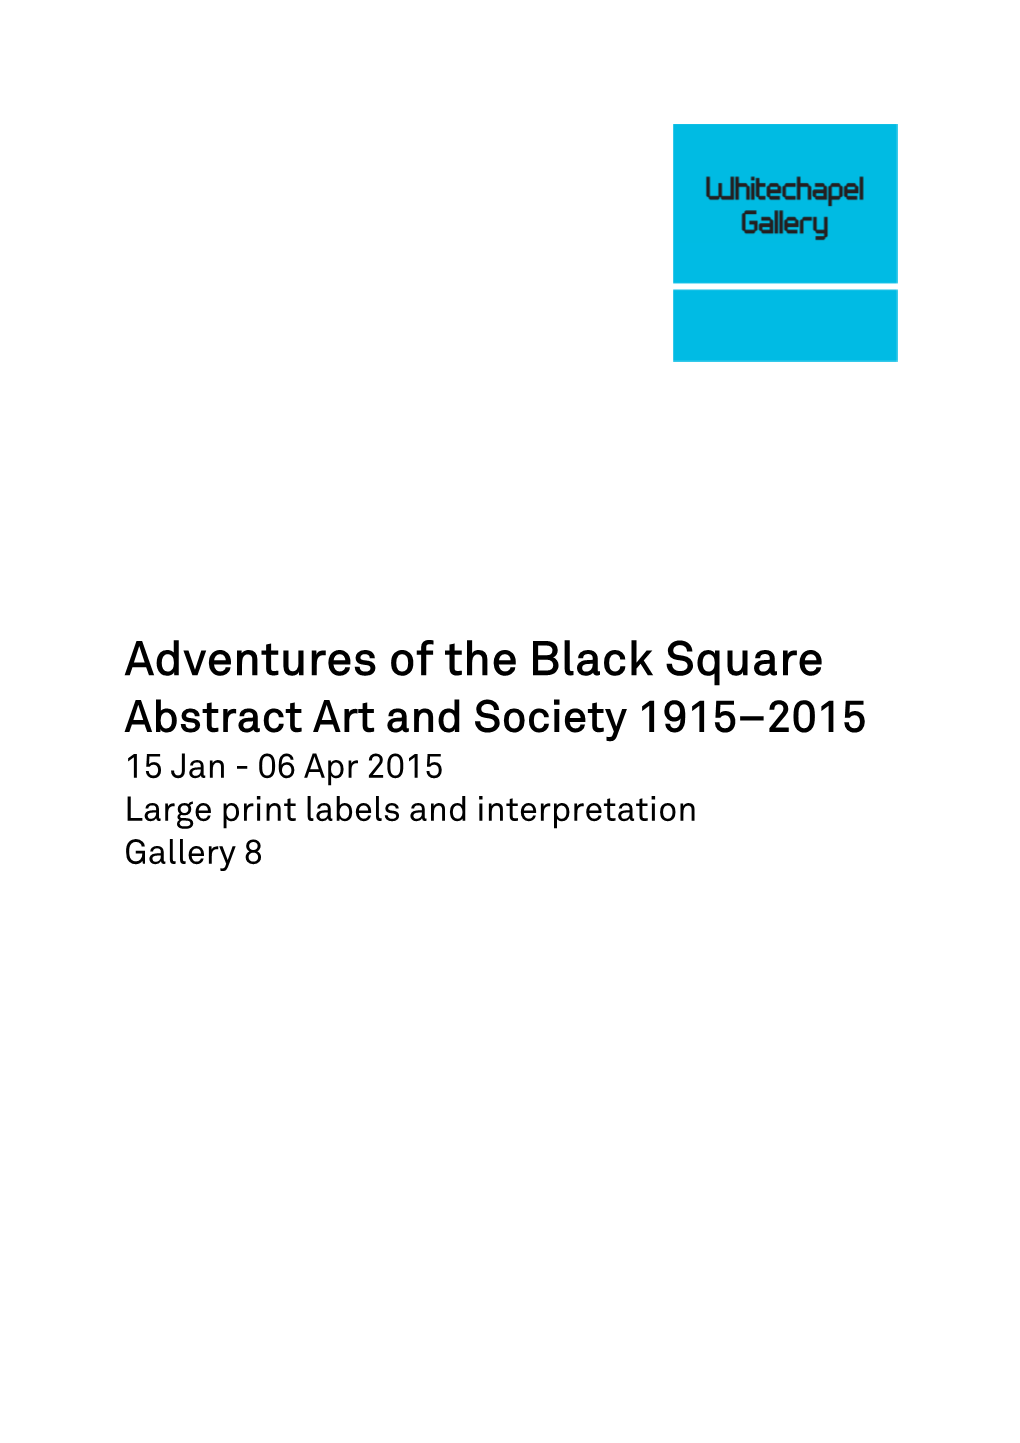 Adventures of the Black Square Abstract Art and Society 1915–2015 15 Jan - 06 Apr 2015 Large Print Labels and Interpretation Gallery 8